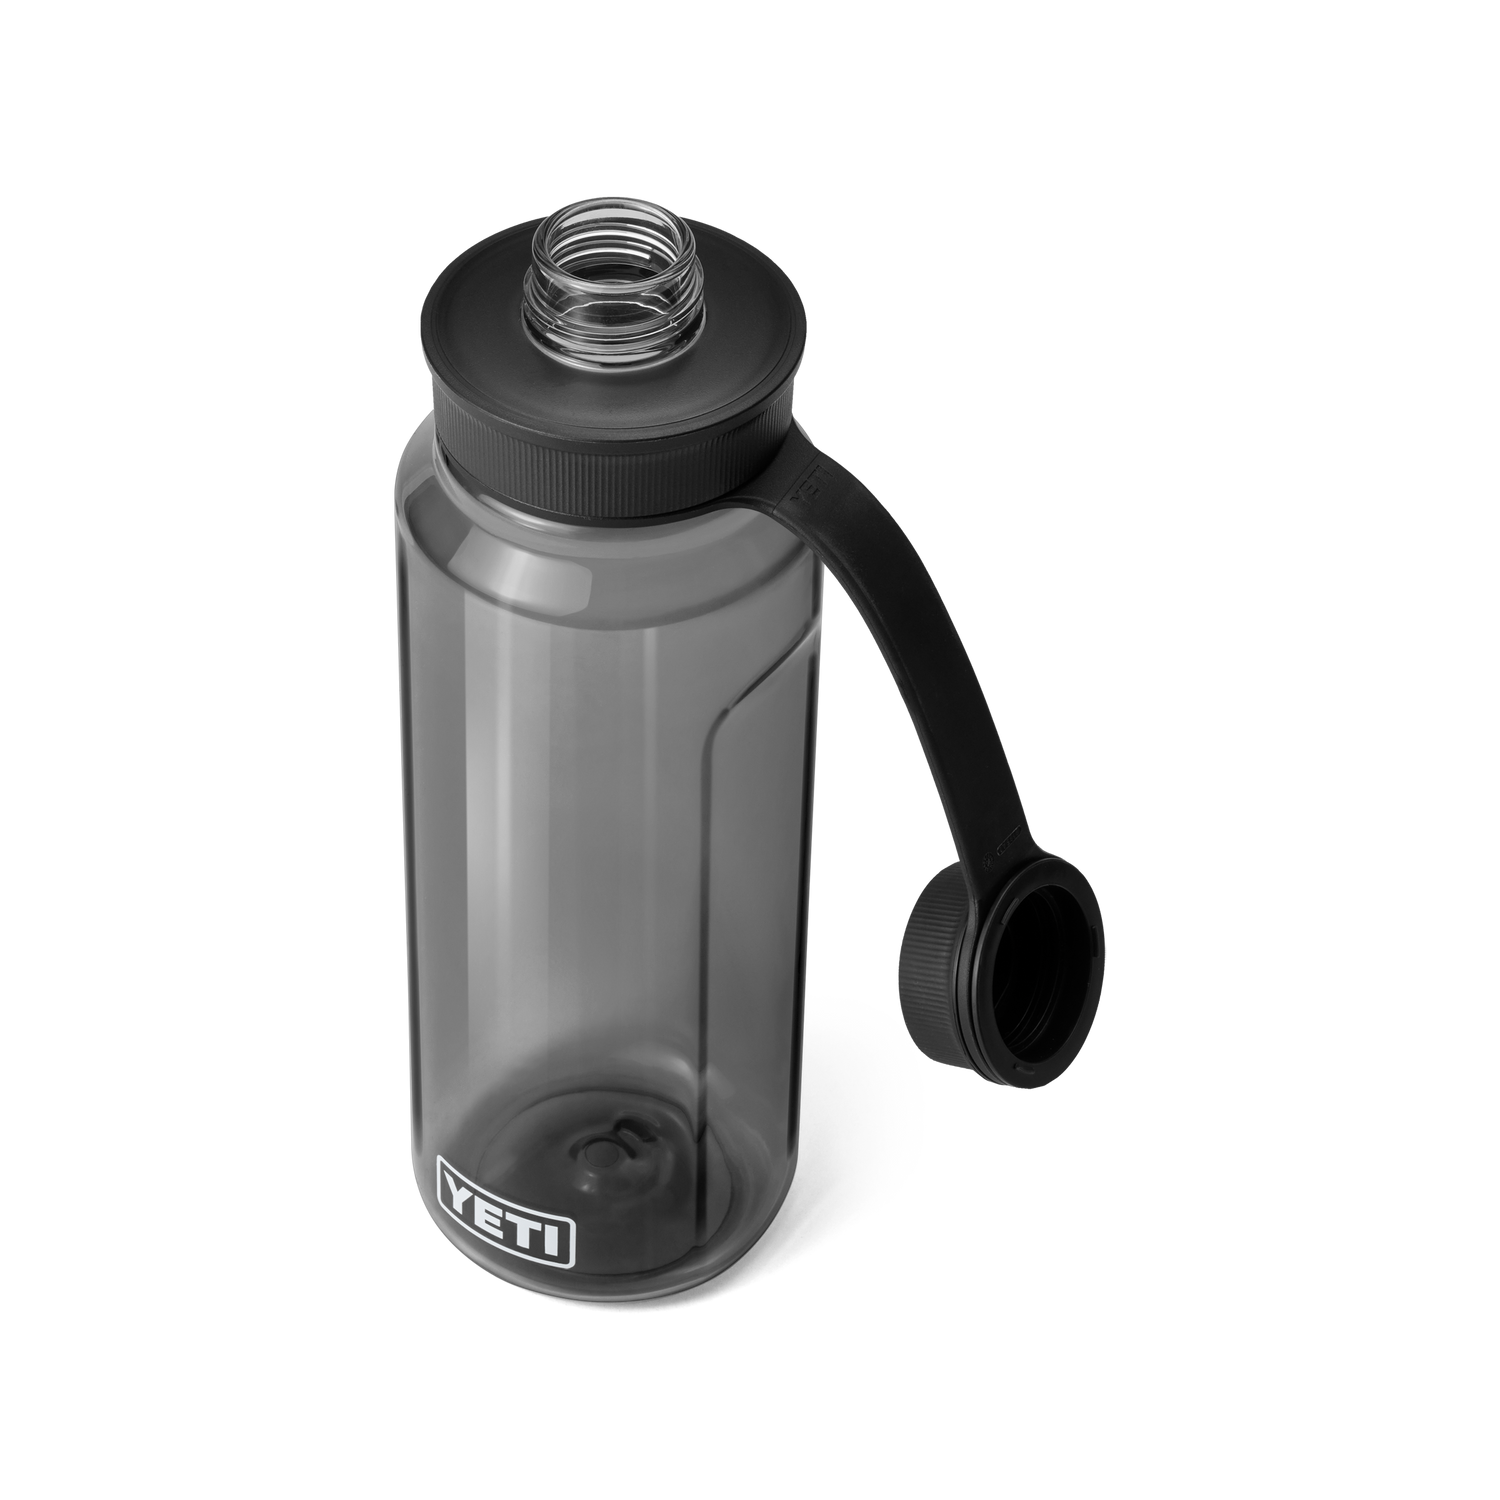 YETI_Wholesale_Drinkware_Yonder_Tether_Accs_1L_Charcoal_3qtr_Open_0818_B_2400x2400.png